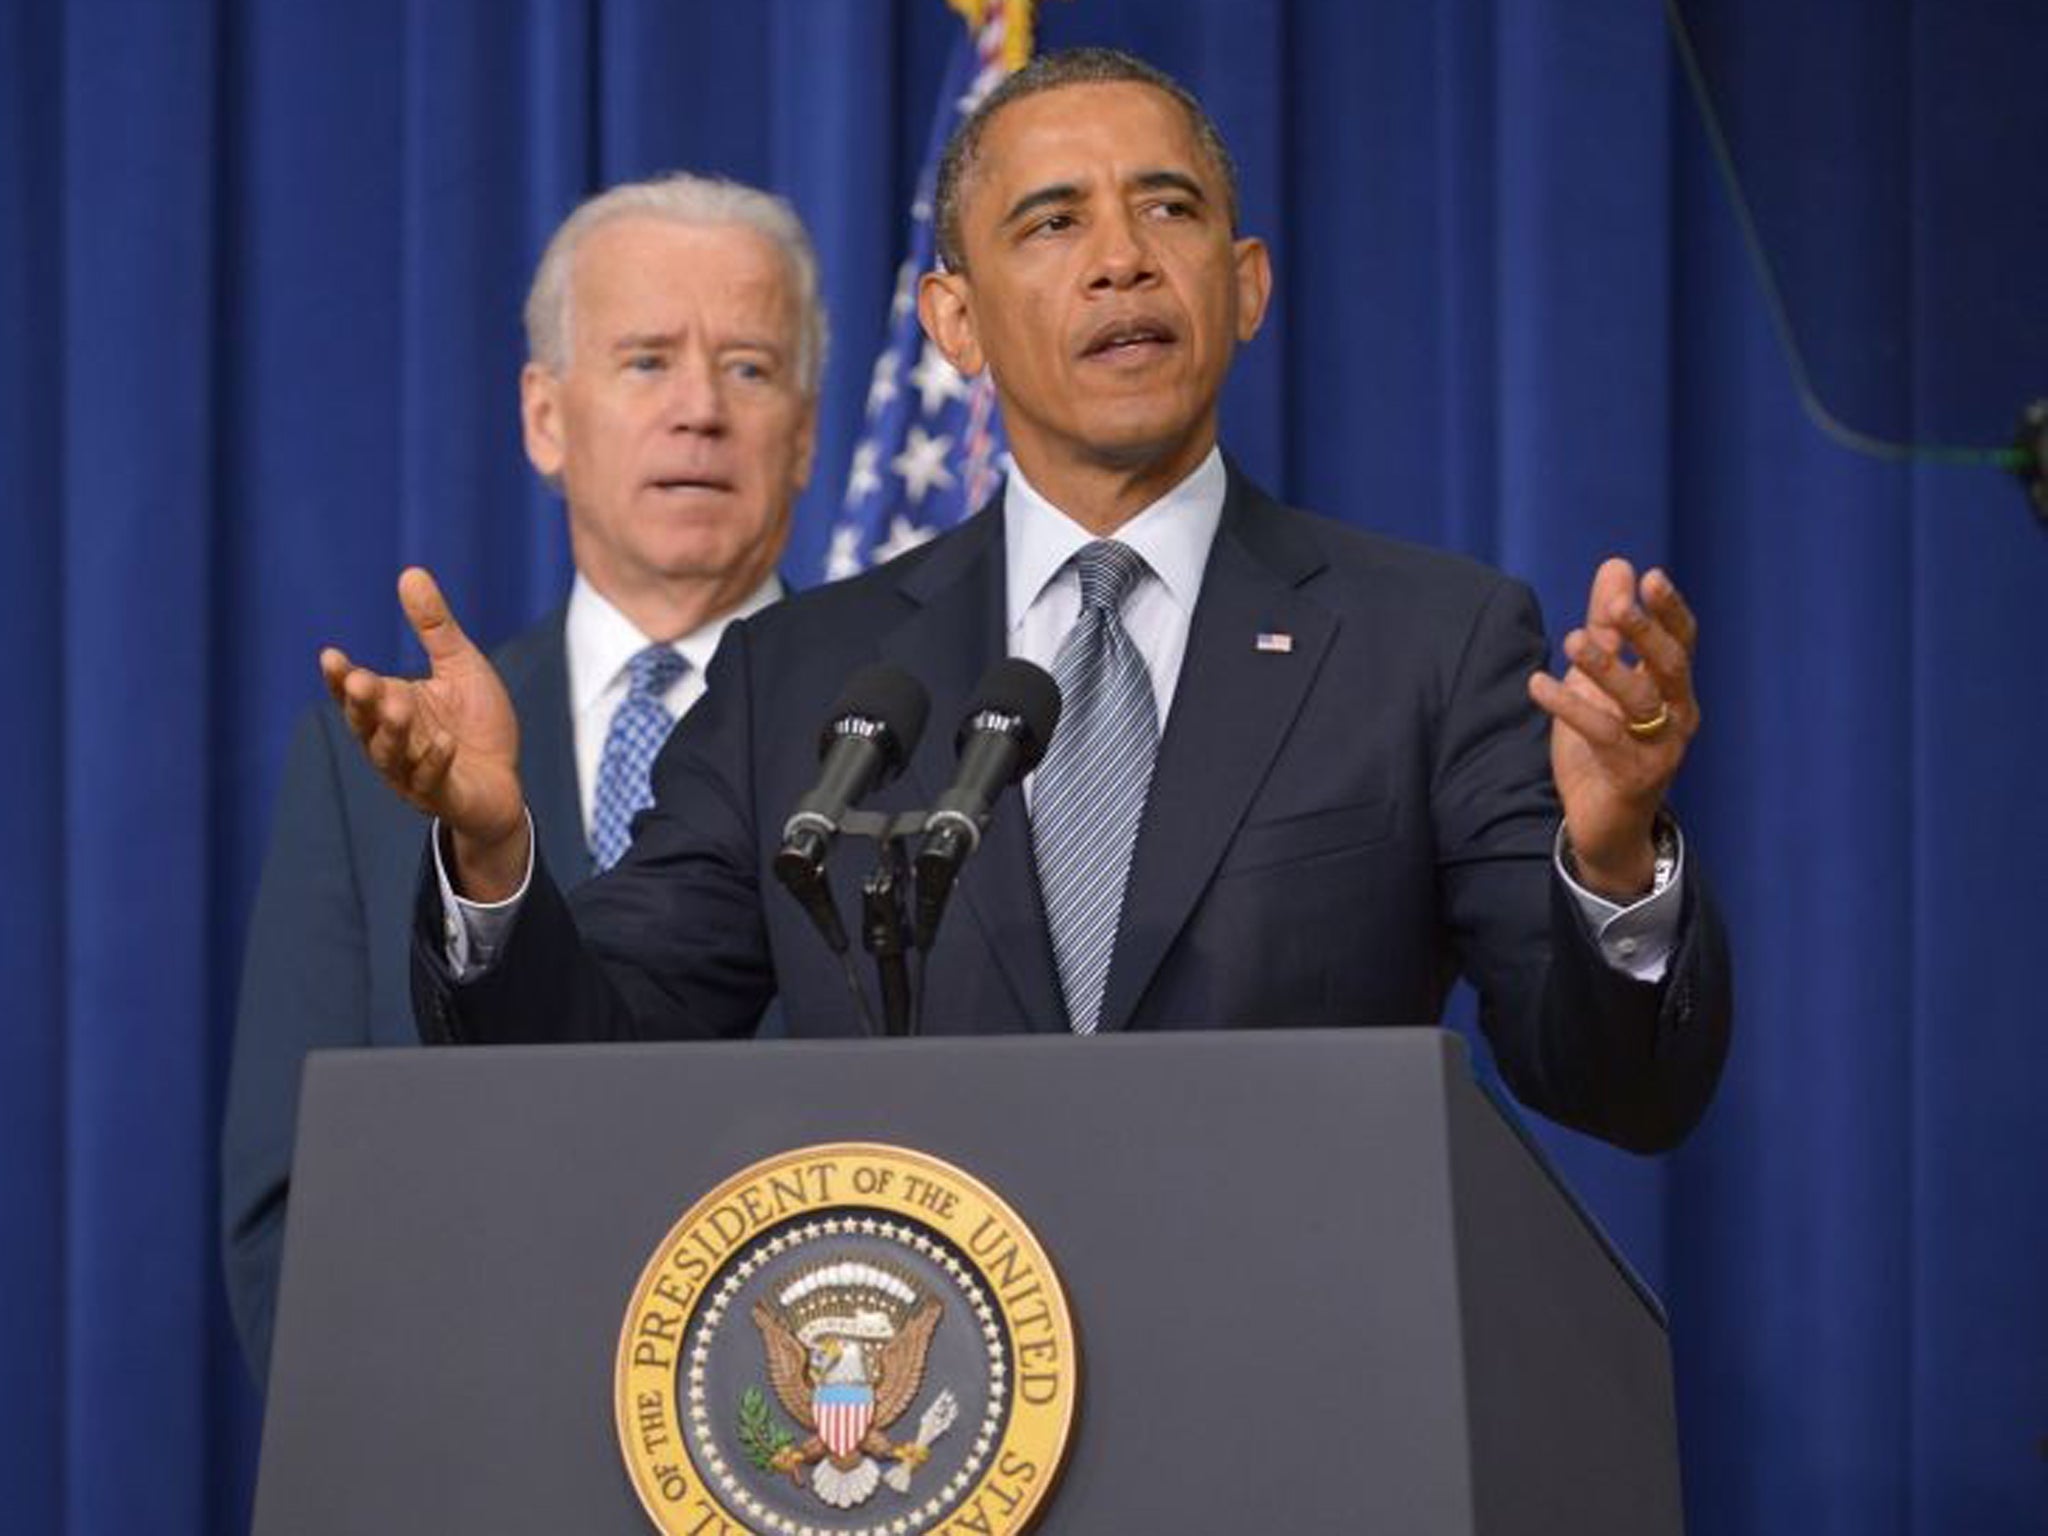 President Obama speaks at the White House, watched on by Vice President Joe Biden